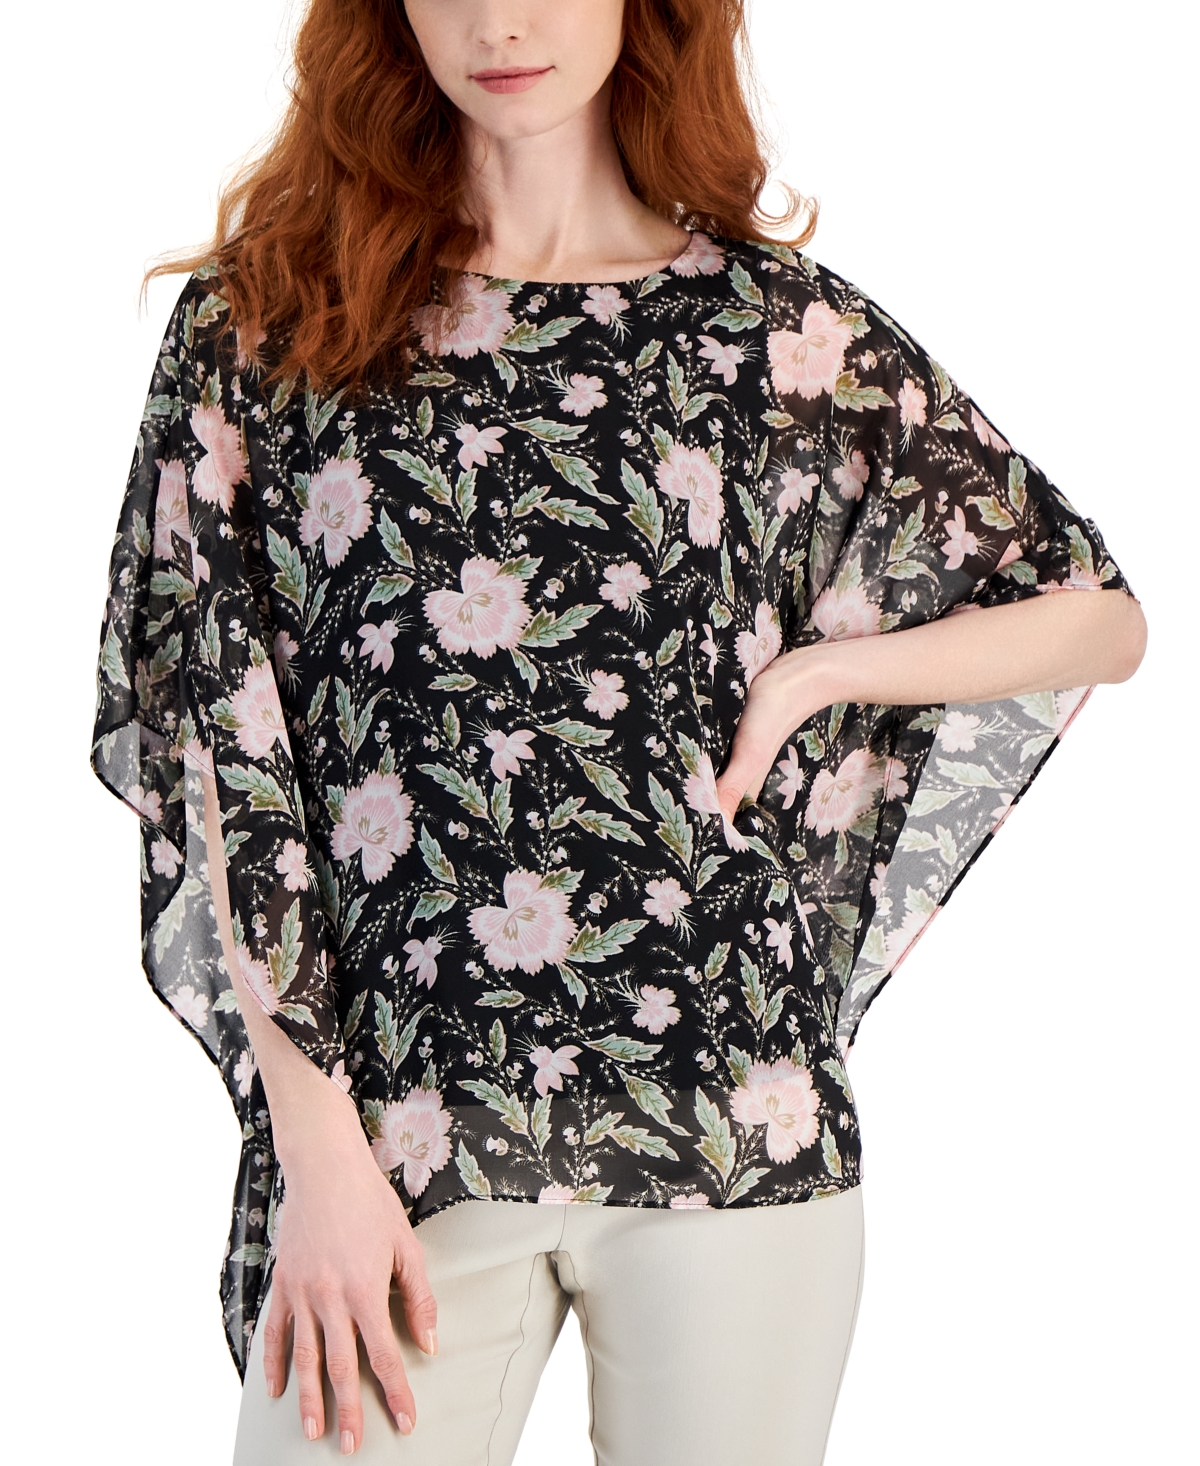 Women's 3/4 Sleeve Printed Poncho Top, Created for Macy's - Intrepid Blue Combo